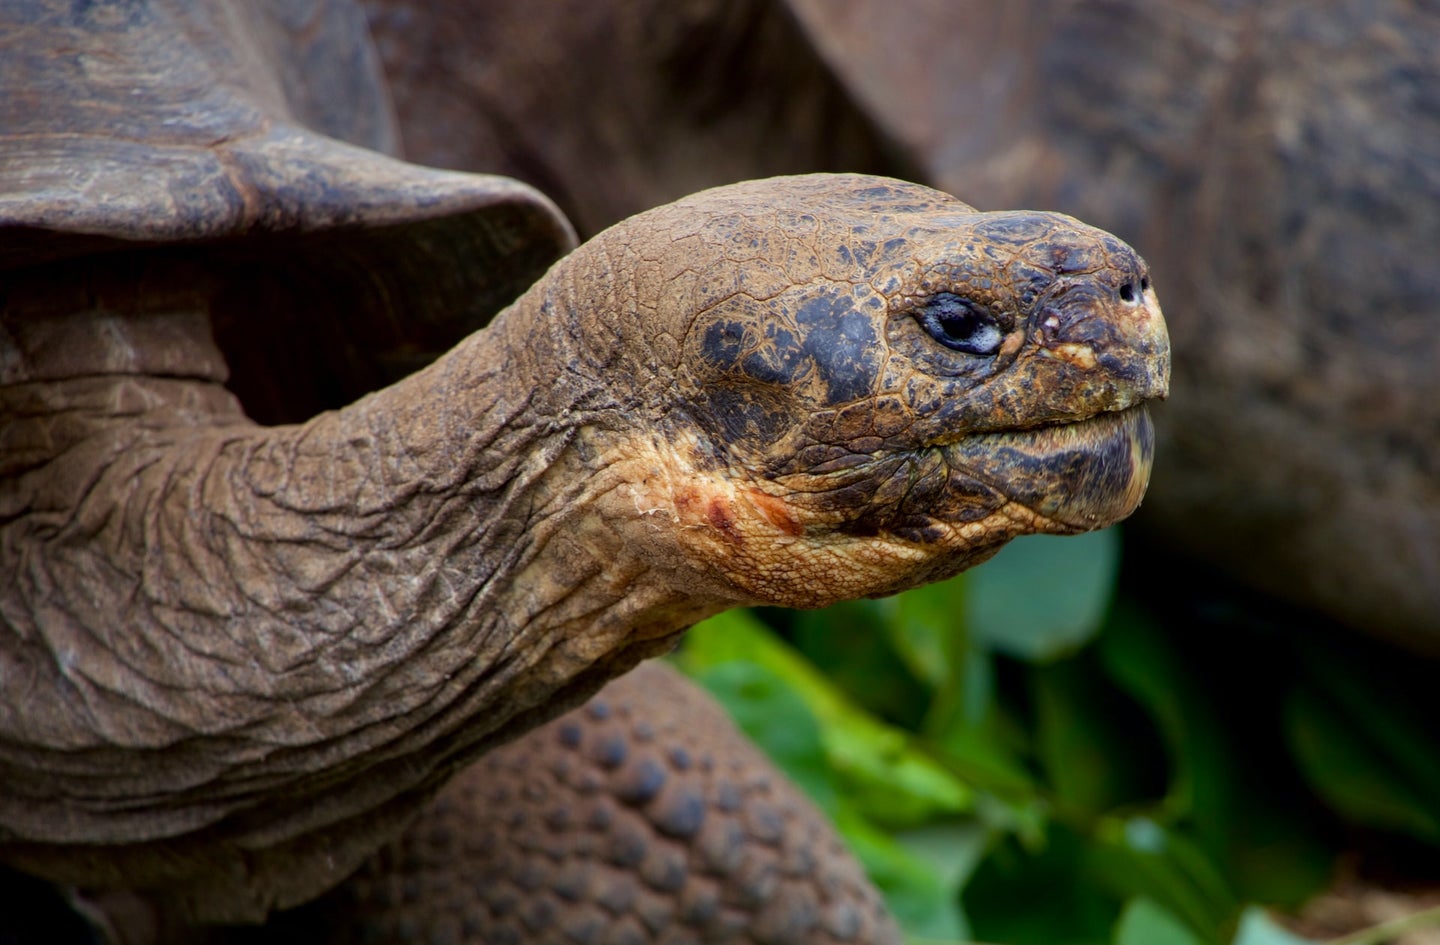 A giant tortoise, one of several species living among the Galapagos Islands.